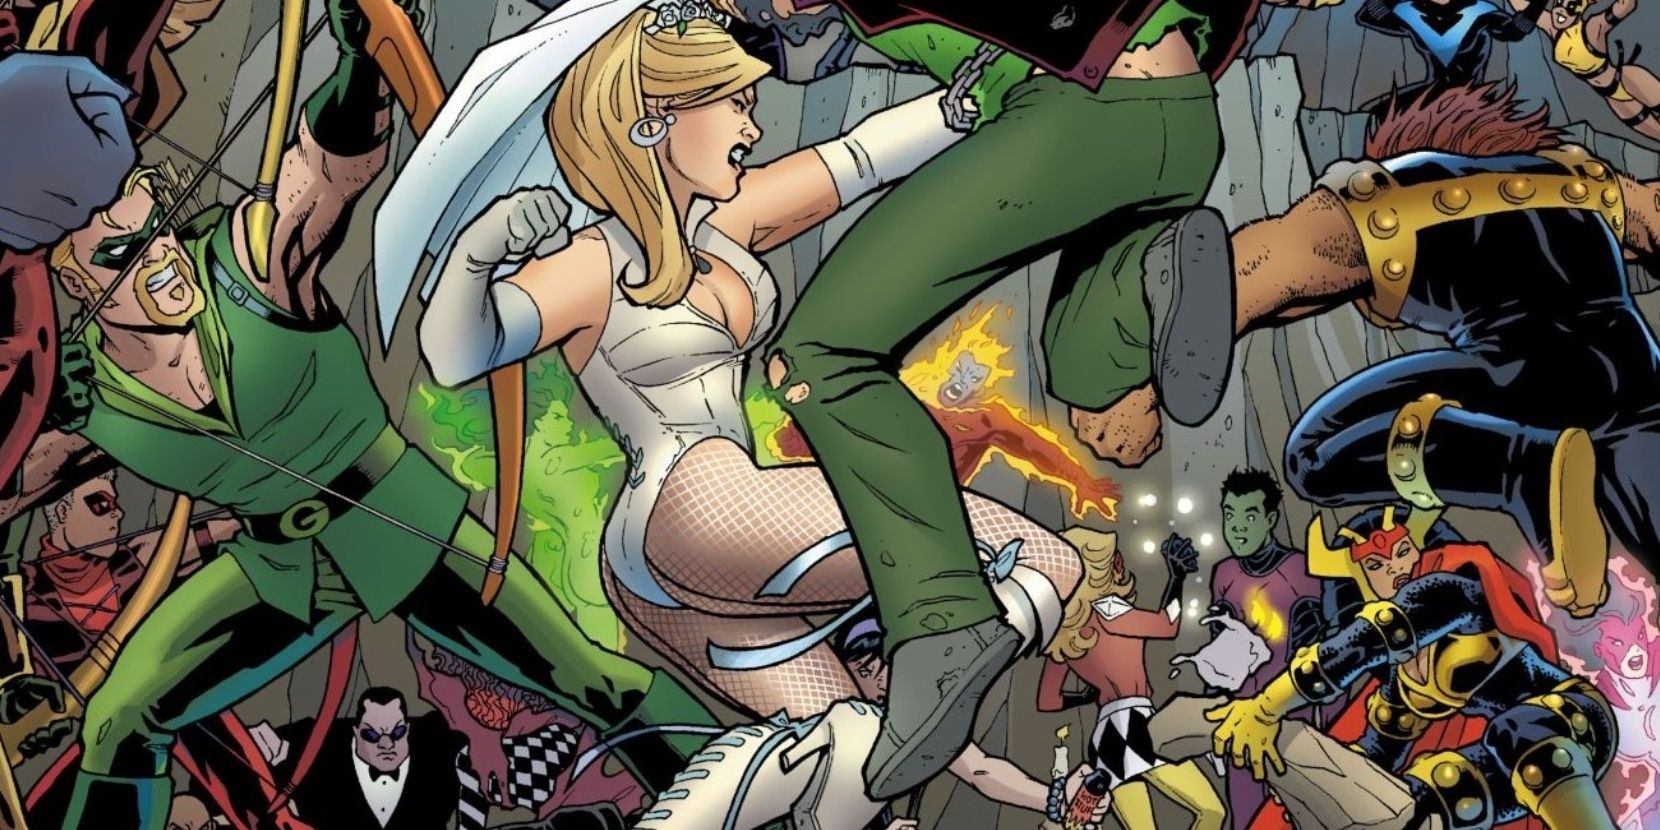 green arrow and black canary fighting at their wedding in DC Comics